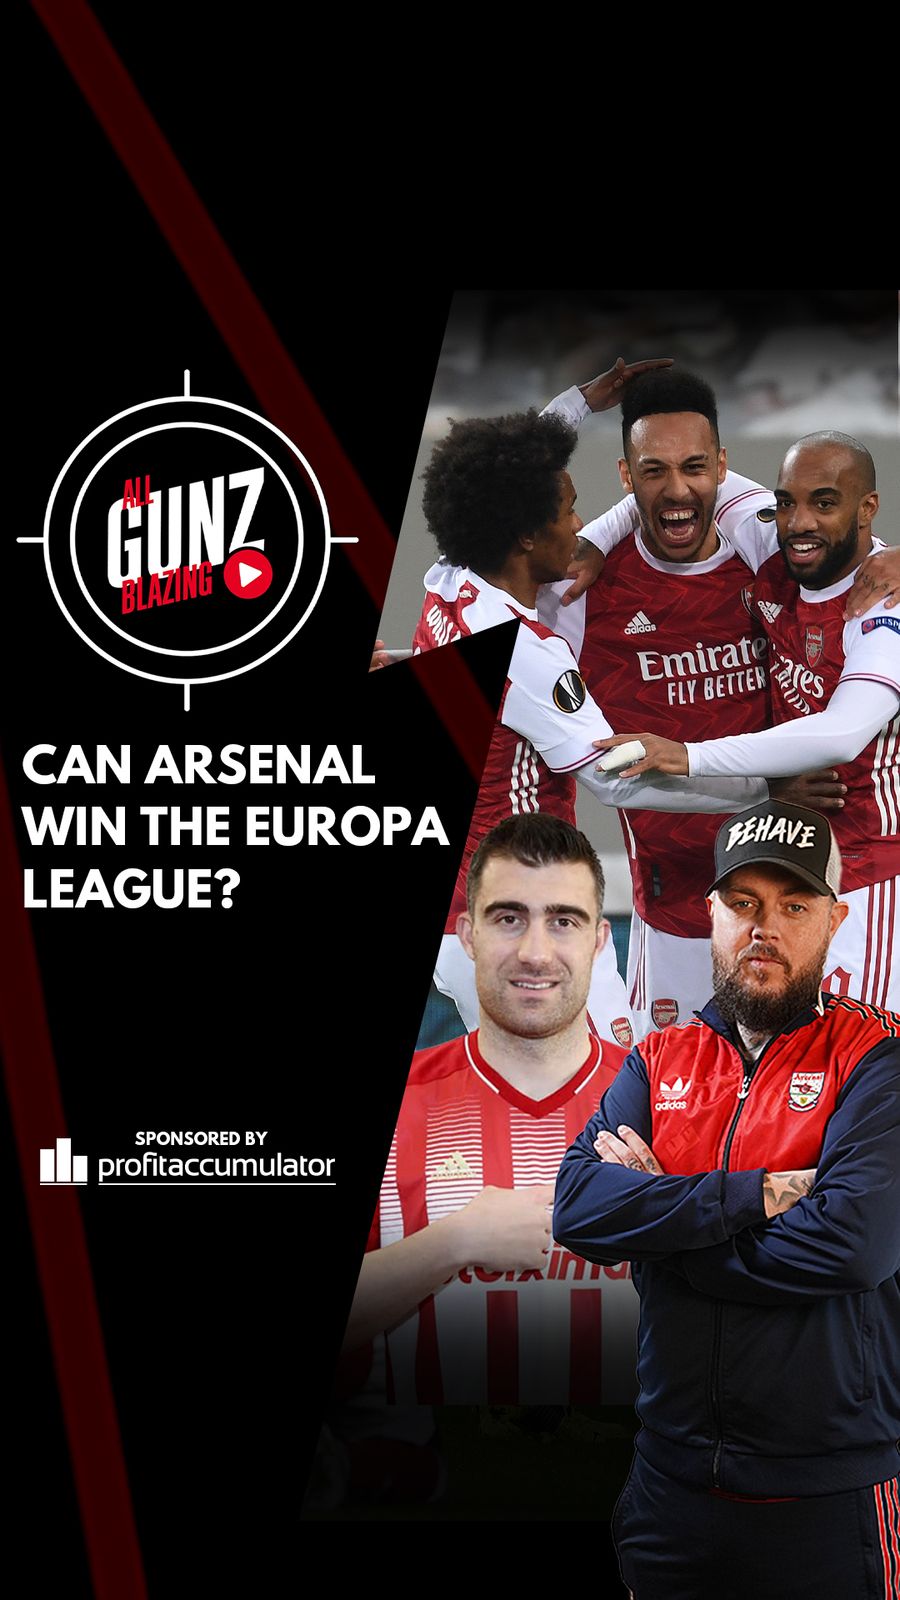 S3 Ep86: Can Arsenal Win The Europa League? | All Gunz Blazing Podcast Ft. DT